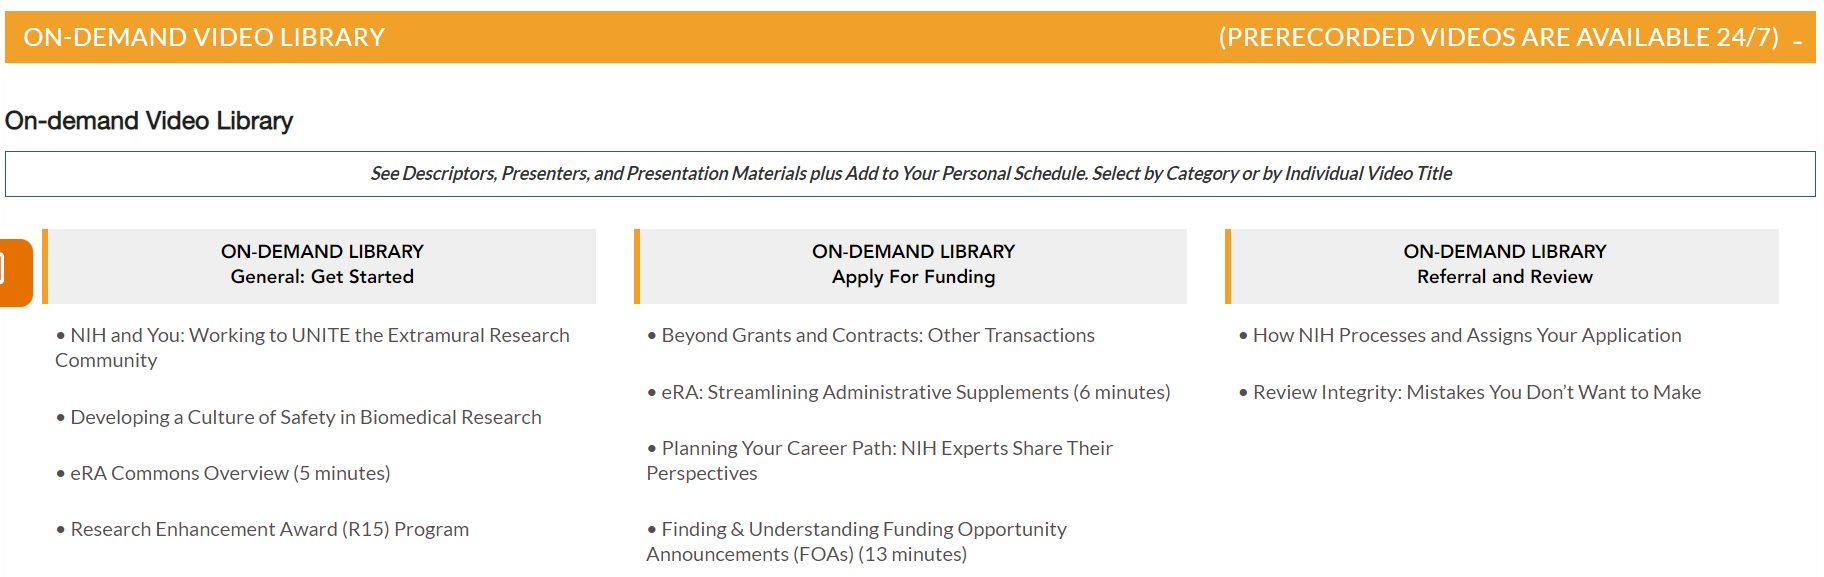 Screenshot of On-Demand video library, showing many different topics of videos on the grants process